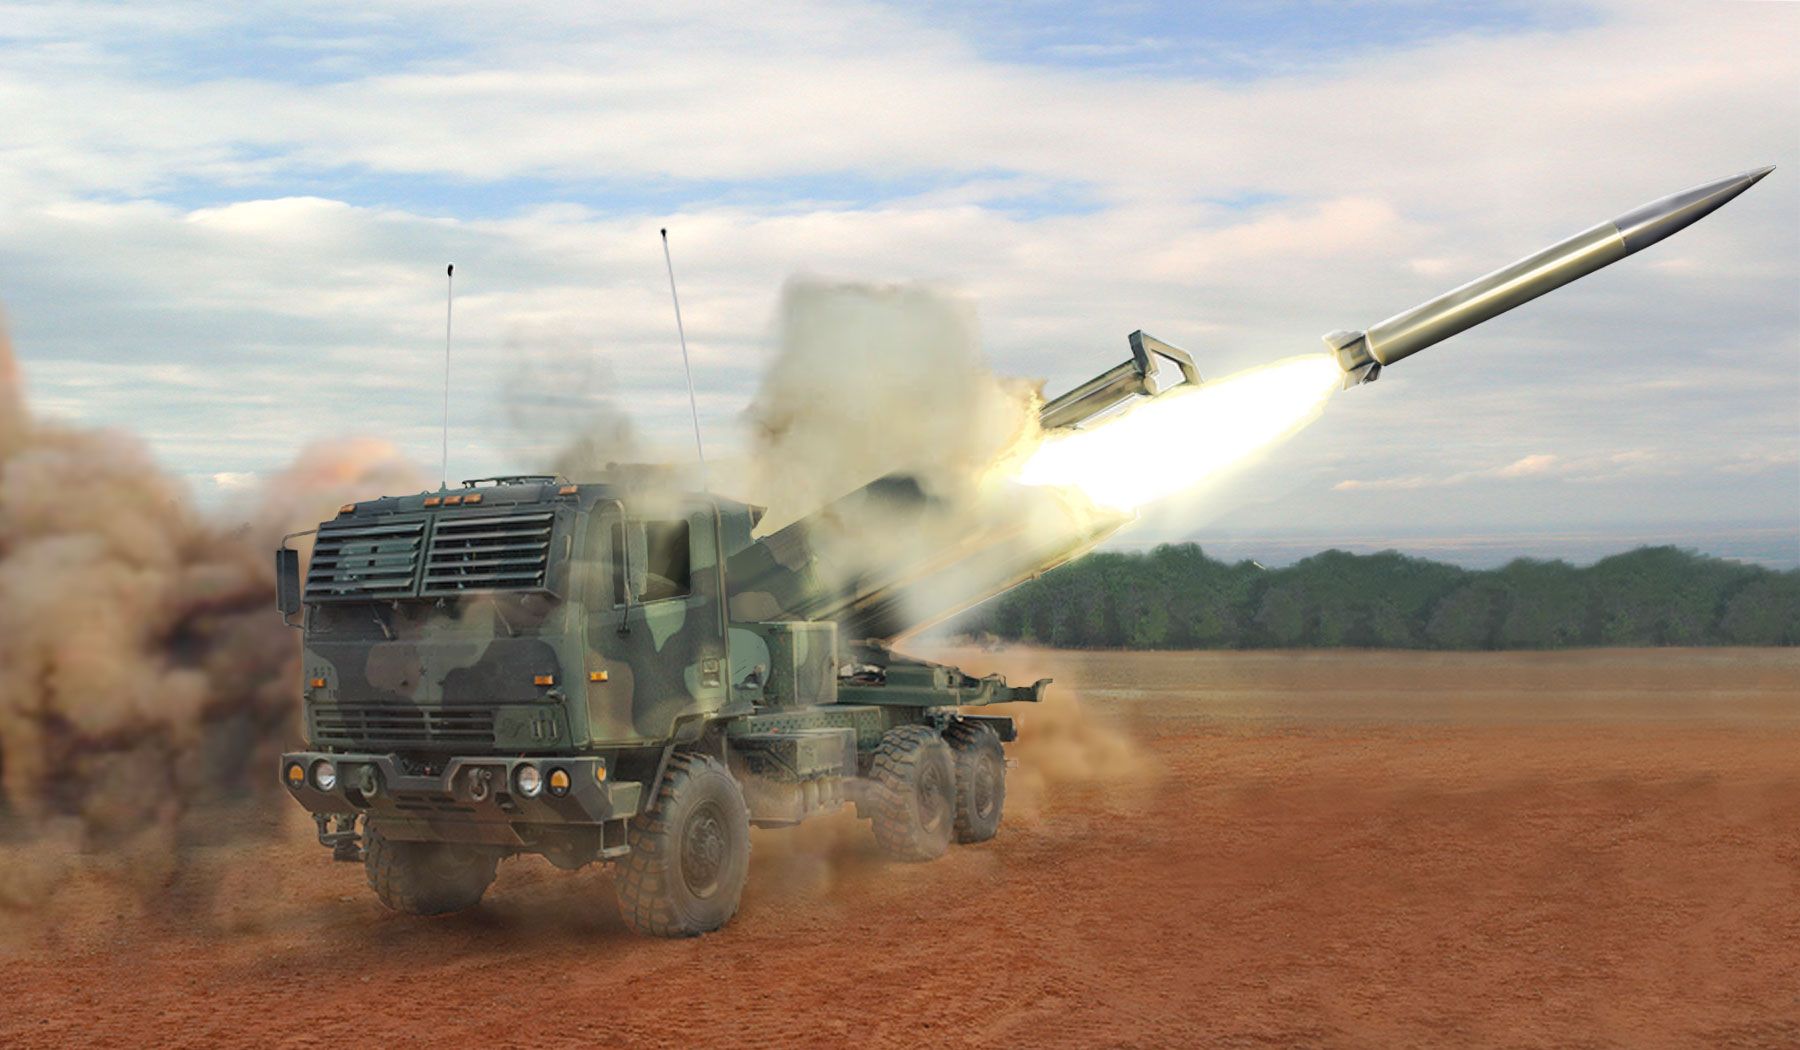 The Army S New Missile Can Reach Over 300 Miles